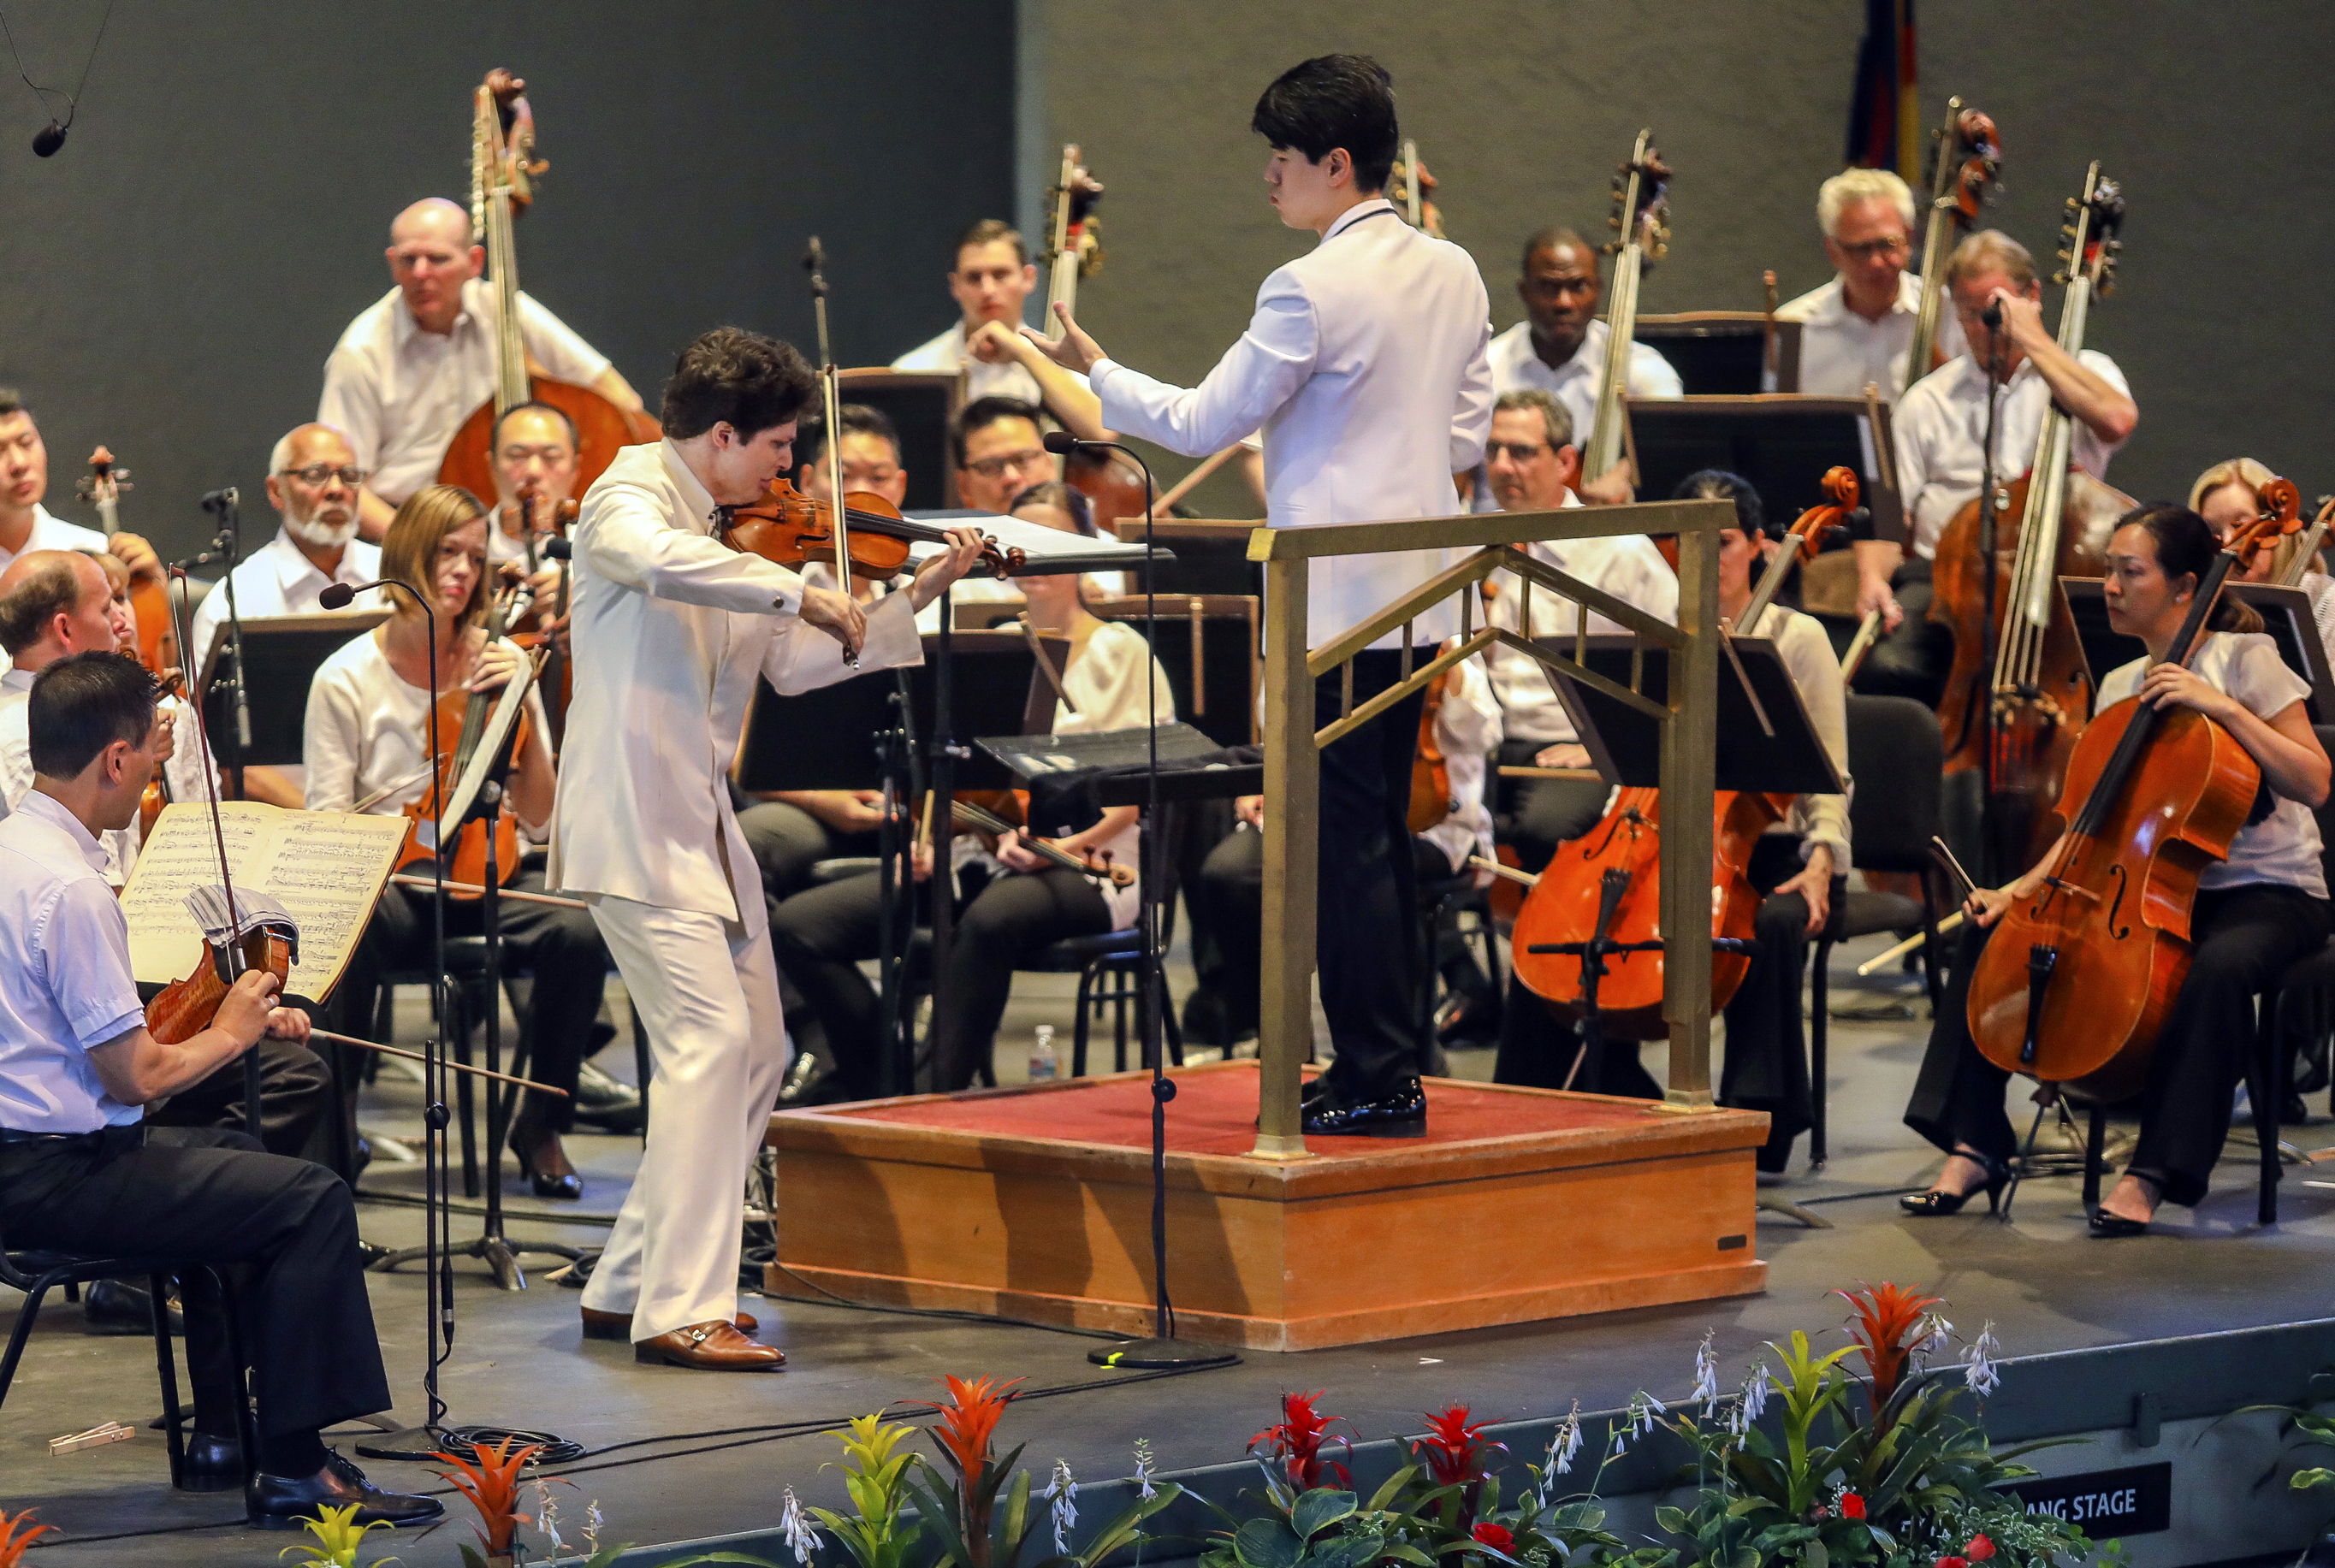 FILE - The Philadelphia Orchestra, conducted by Kensho Watanabe, and Musical America's 2018 Instrumentalist of the Year, Augustin Hadelich, on violin, performs during the second-to-last performance of the Philadelphia Orchestra of the Bravo! Vail season in Vail, Colo., on July 13, 2018. In a deal announced Saturday night, Oct. 21, 2023, musicians of the Philadelphia Orchestra and the Philadelphia Orchestra Association have ratified a collective bargaining agreement calling for minimum salaries to increase by 15.8% over three years. (Chris Dillmann/Vail Daily via AP, File)